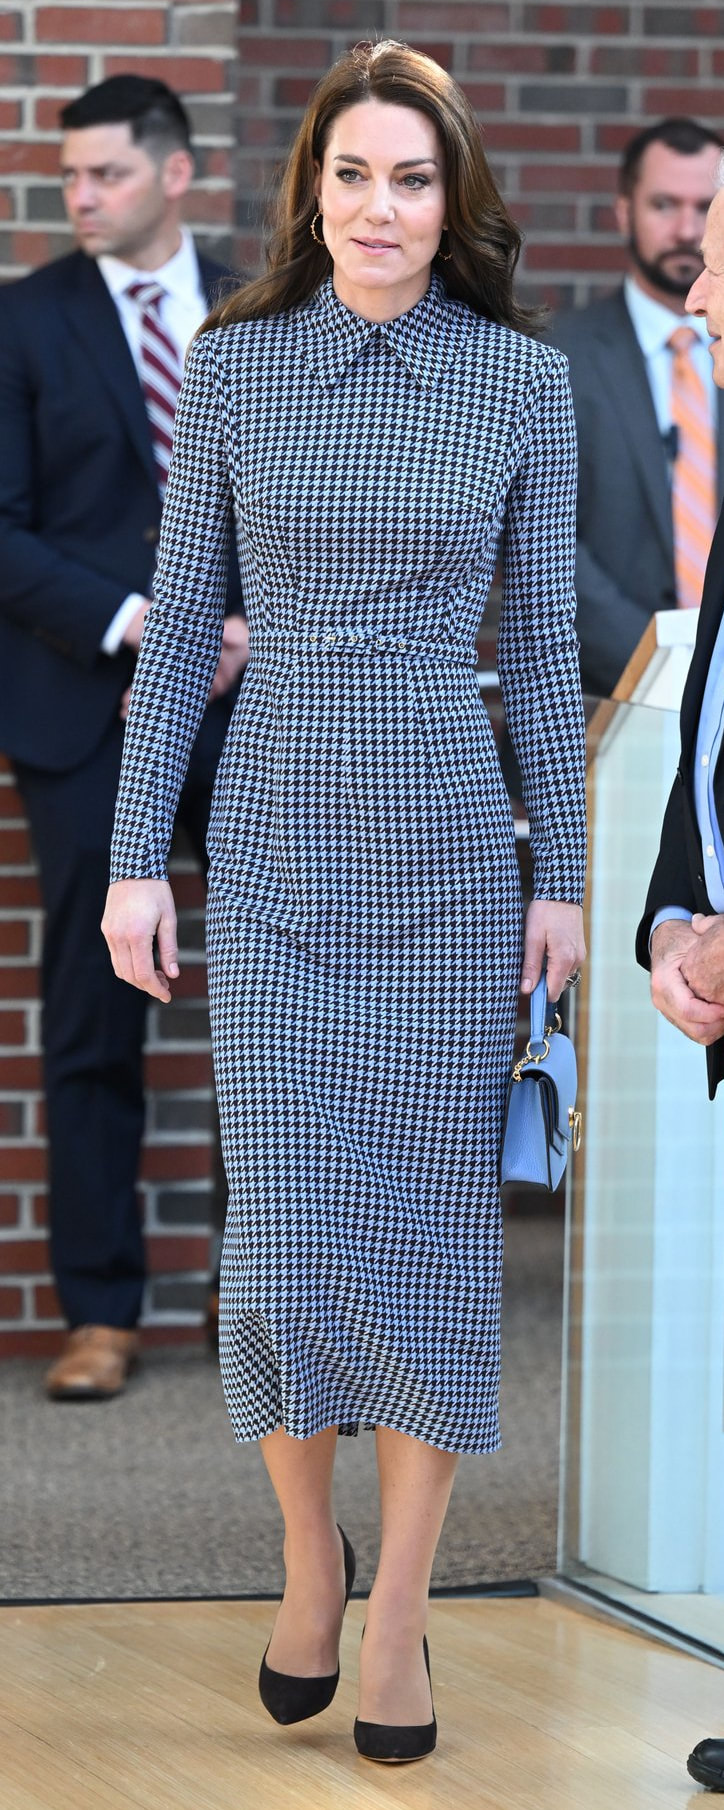 Mulberry Harlow Satchel in Cloud Blue​ as seen on Kate Middleton, Princess of Wales.